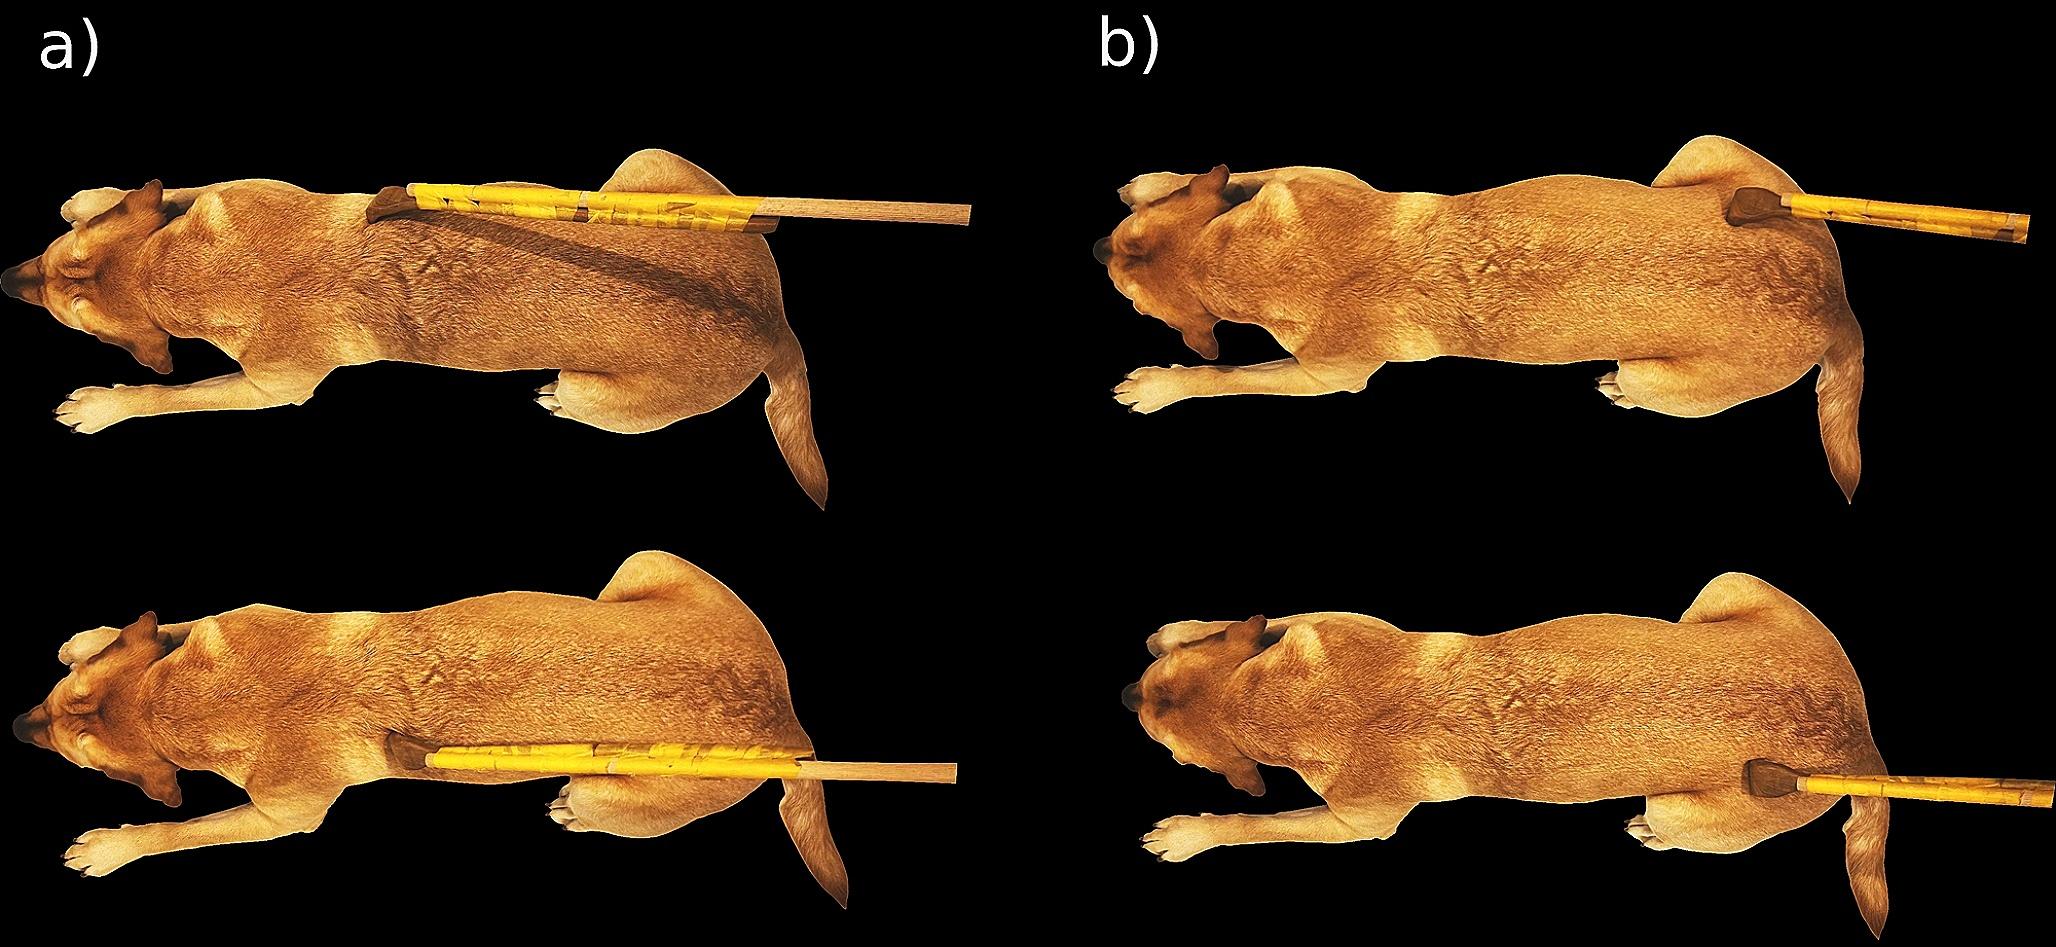 Functional mapping of the somatosensory cortex using noninvasive fMRI and touch in awake dogs